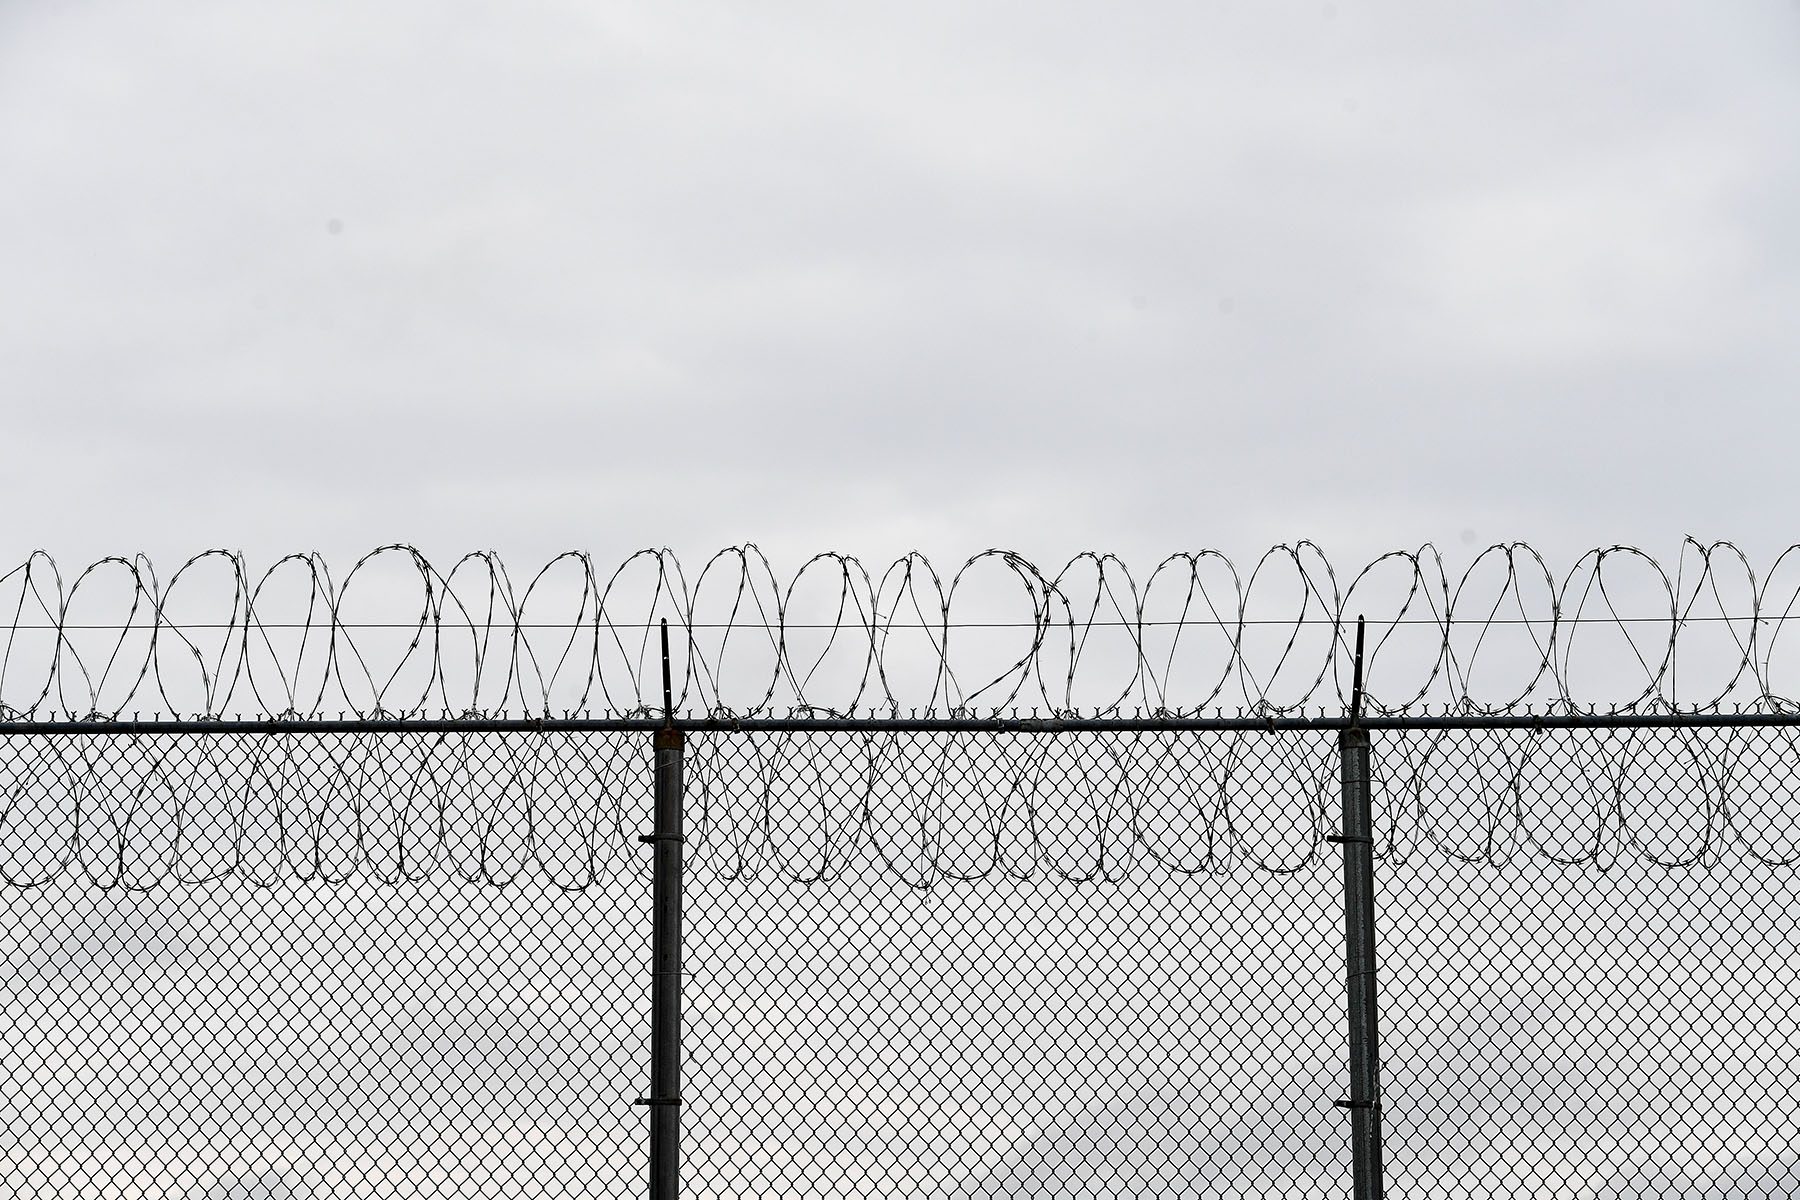 A prison fence with barbed wire photographed on a cloudy day.